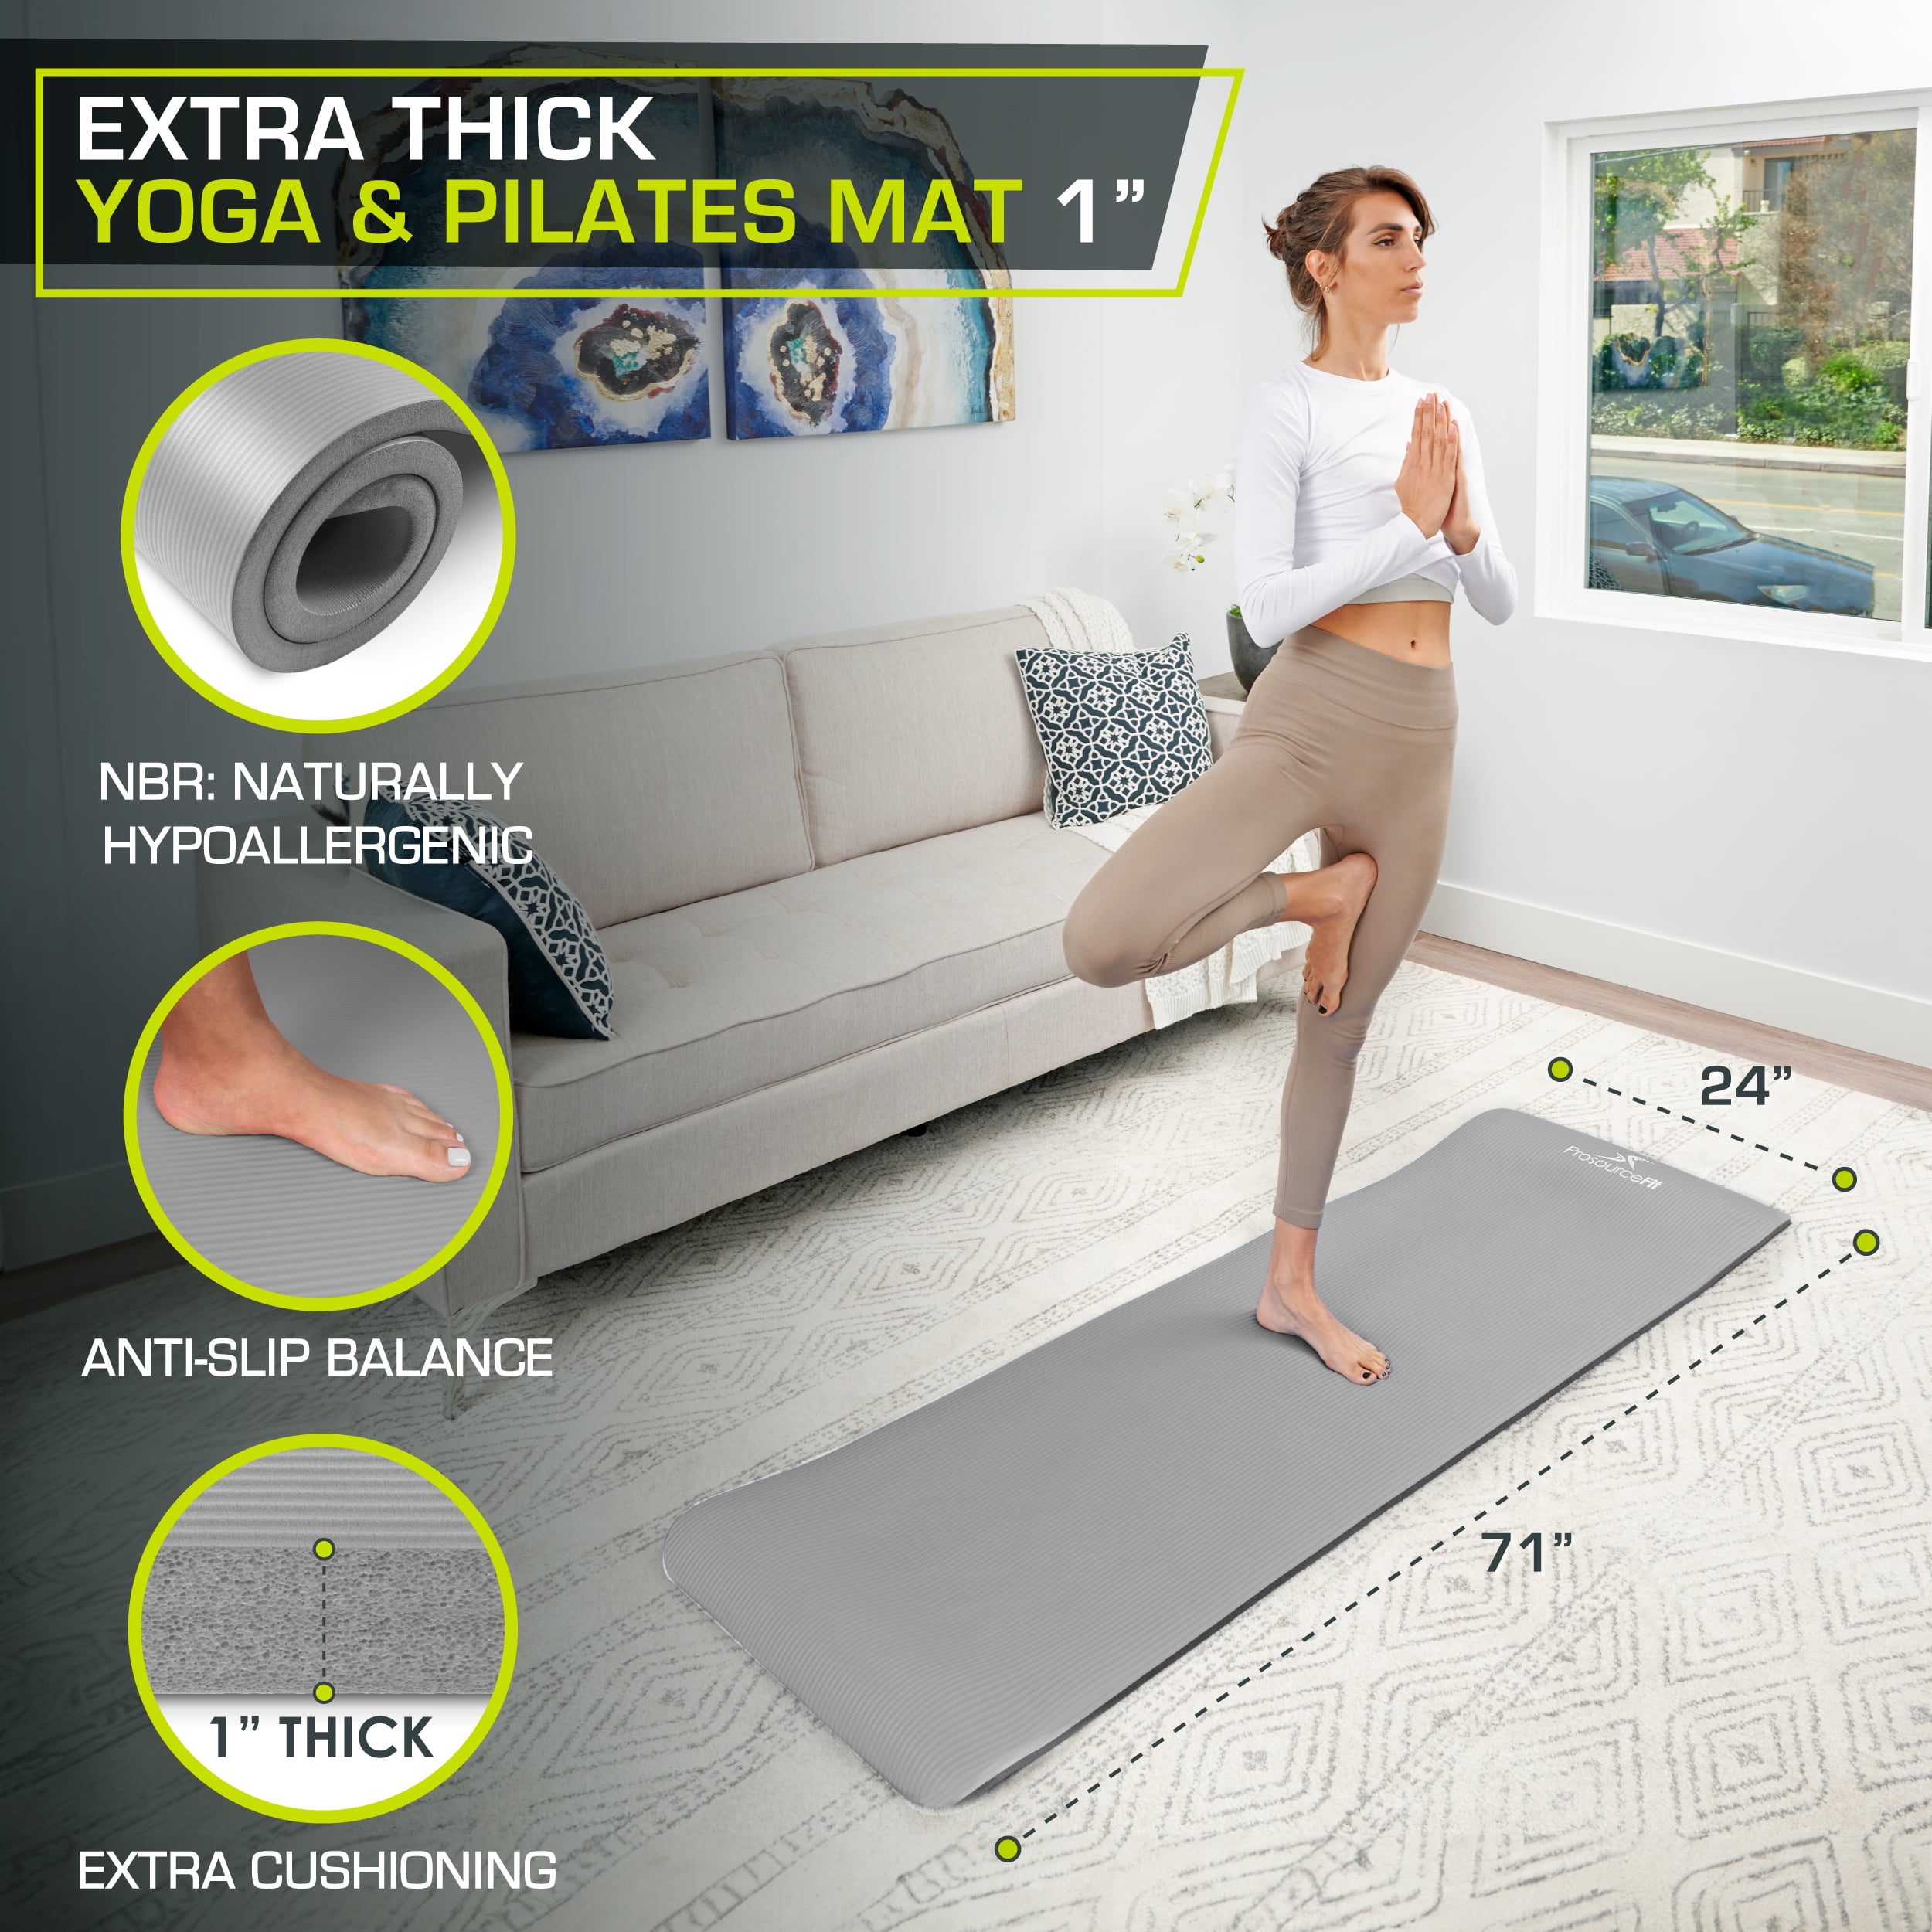 ProsourceFit Extra Thick Yoga and Pilates Mat 1-in, 71”L x 24”W Black 